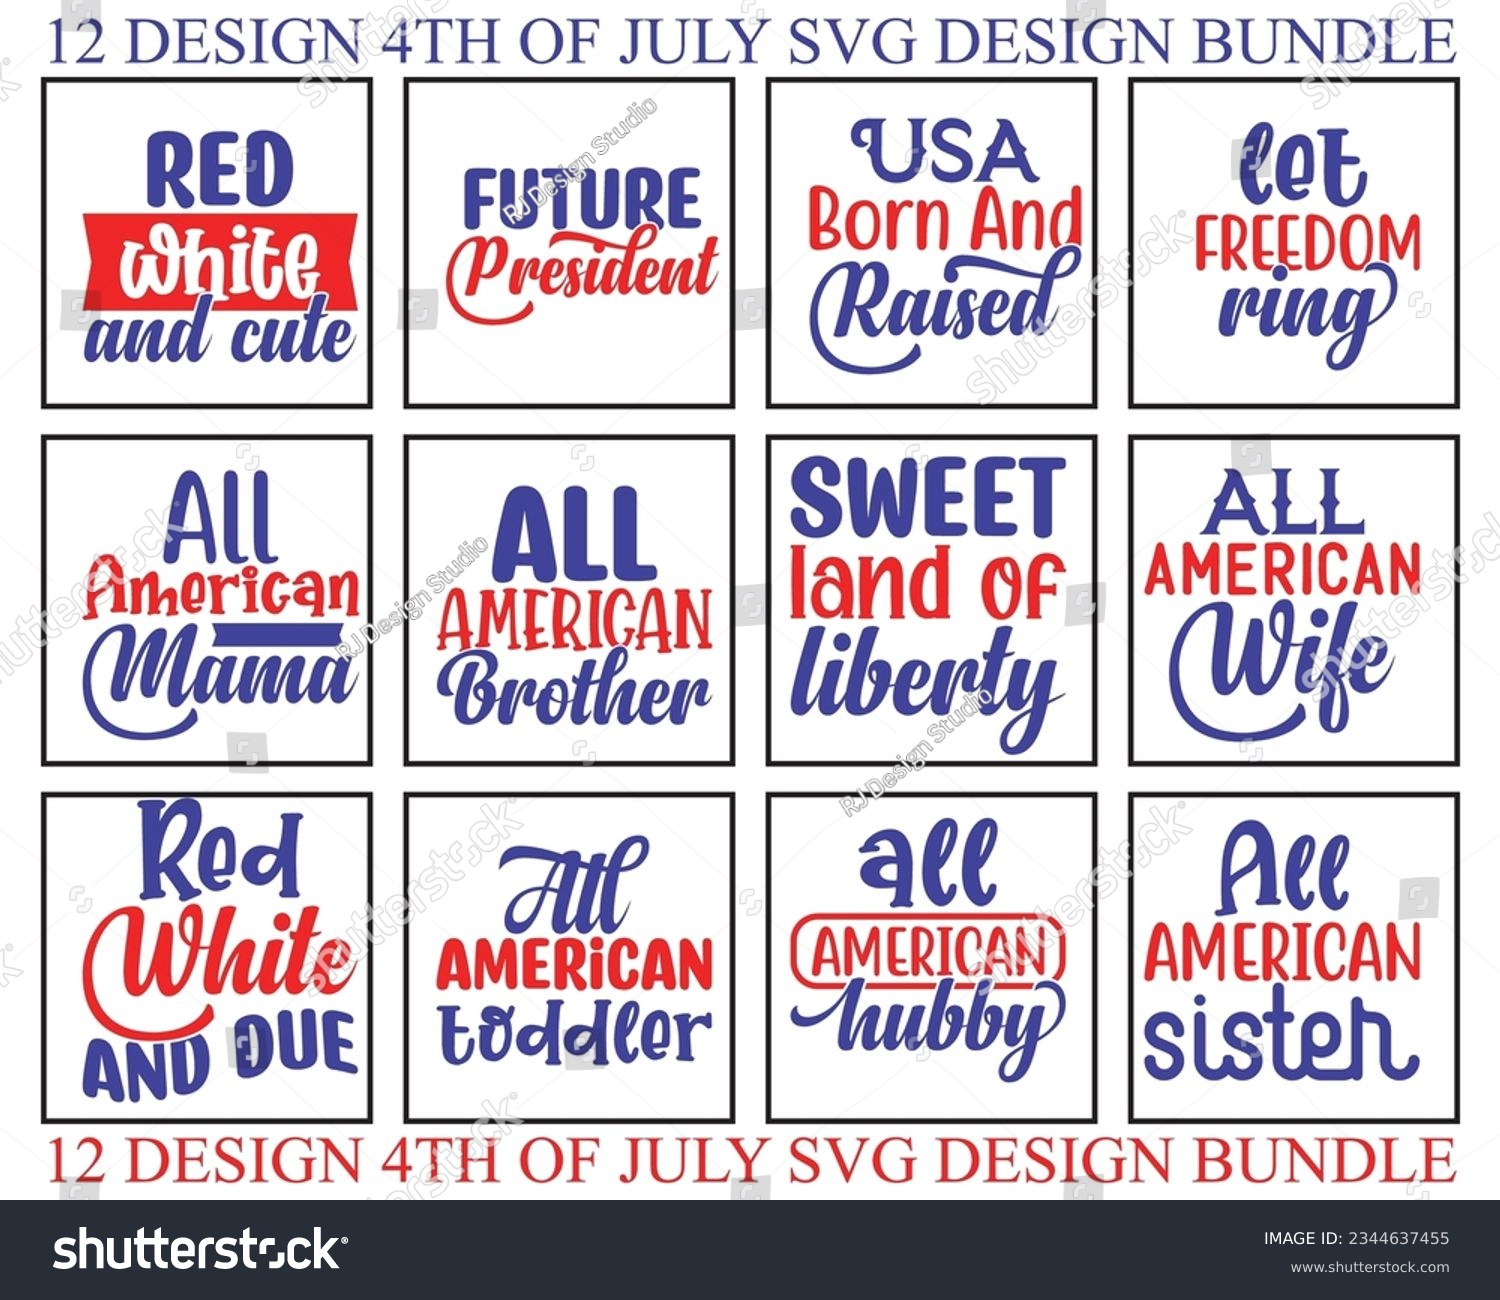 SVG of 4th of July SVG Design Bundle , 4th of July SVG Quotes, Retro 4th of July svg